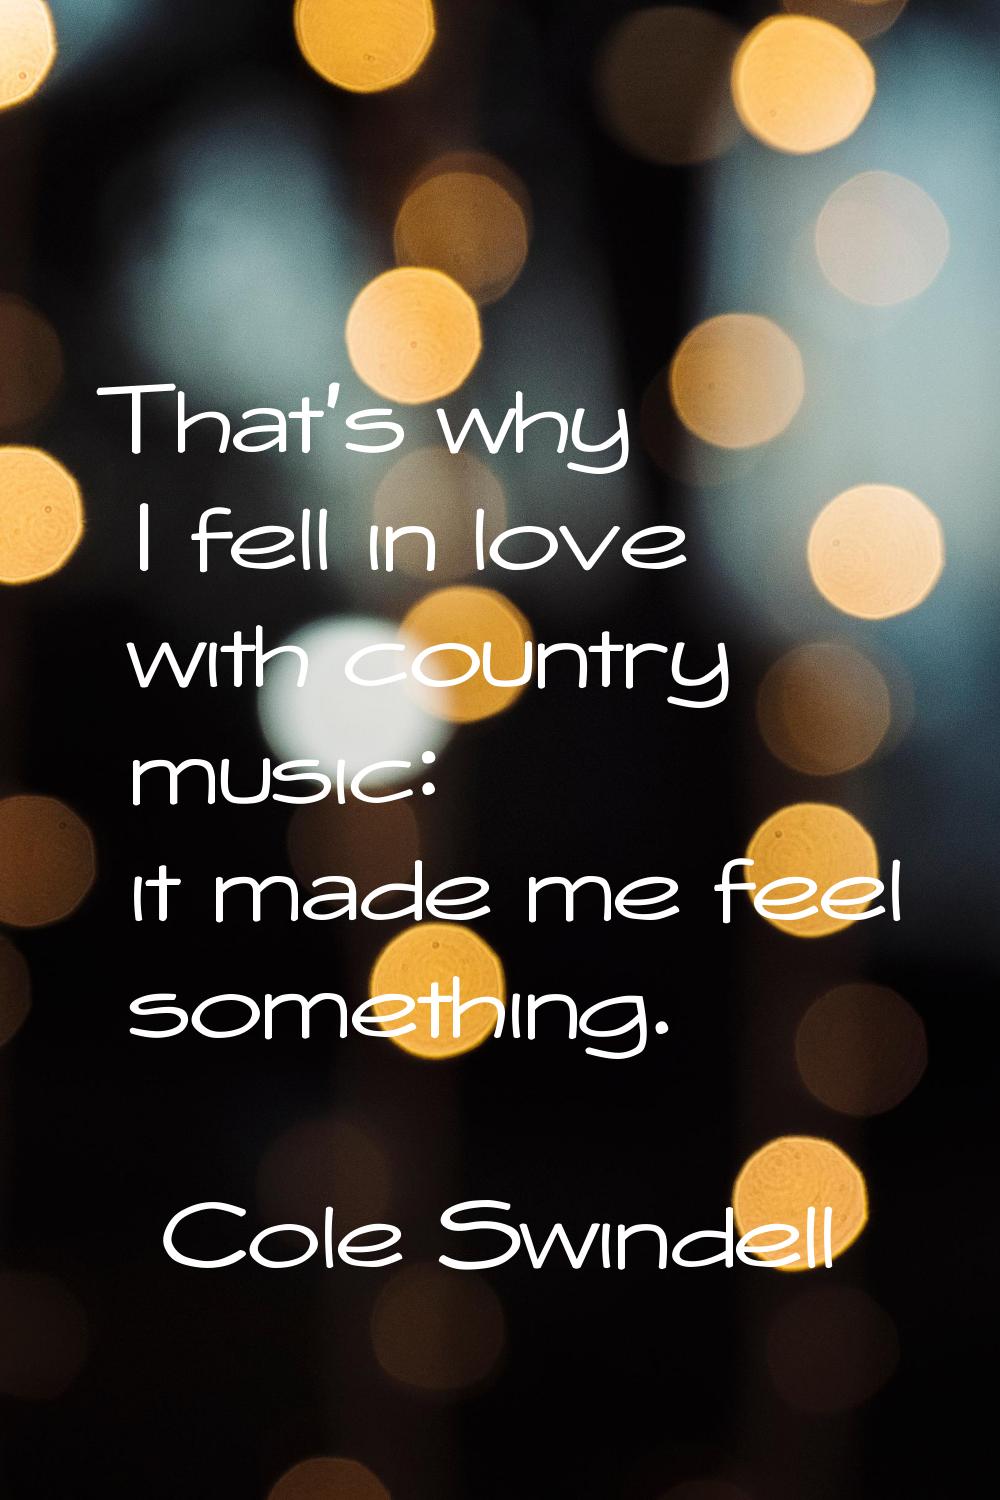 That's why I fell in love with country music: it made me feel something.